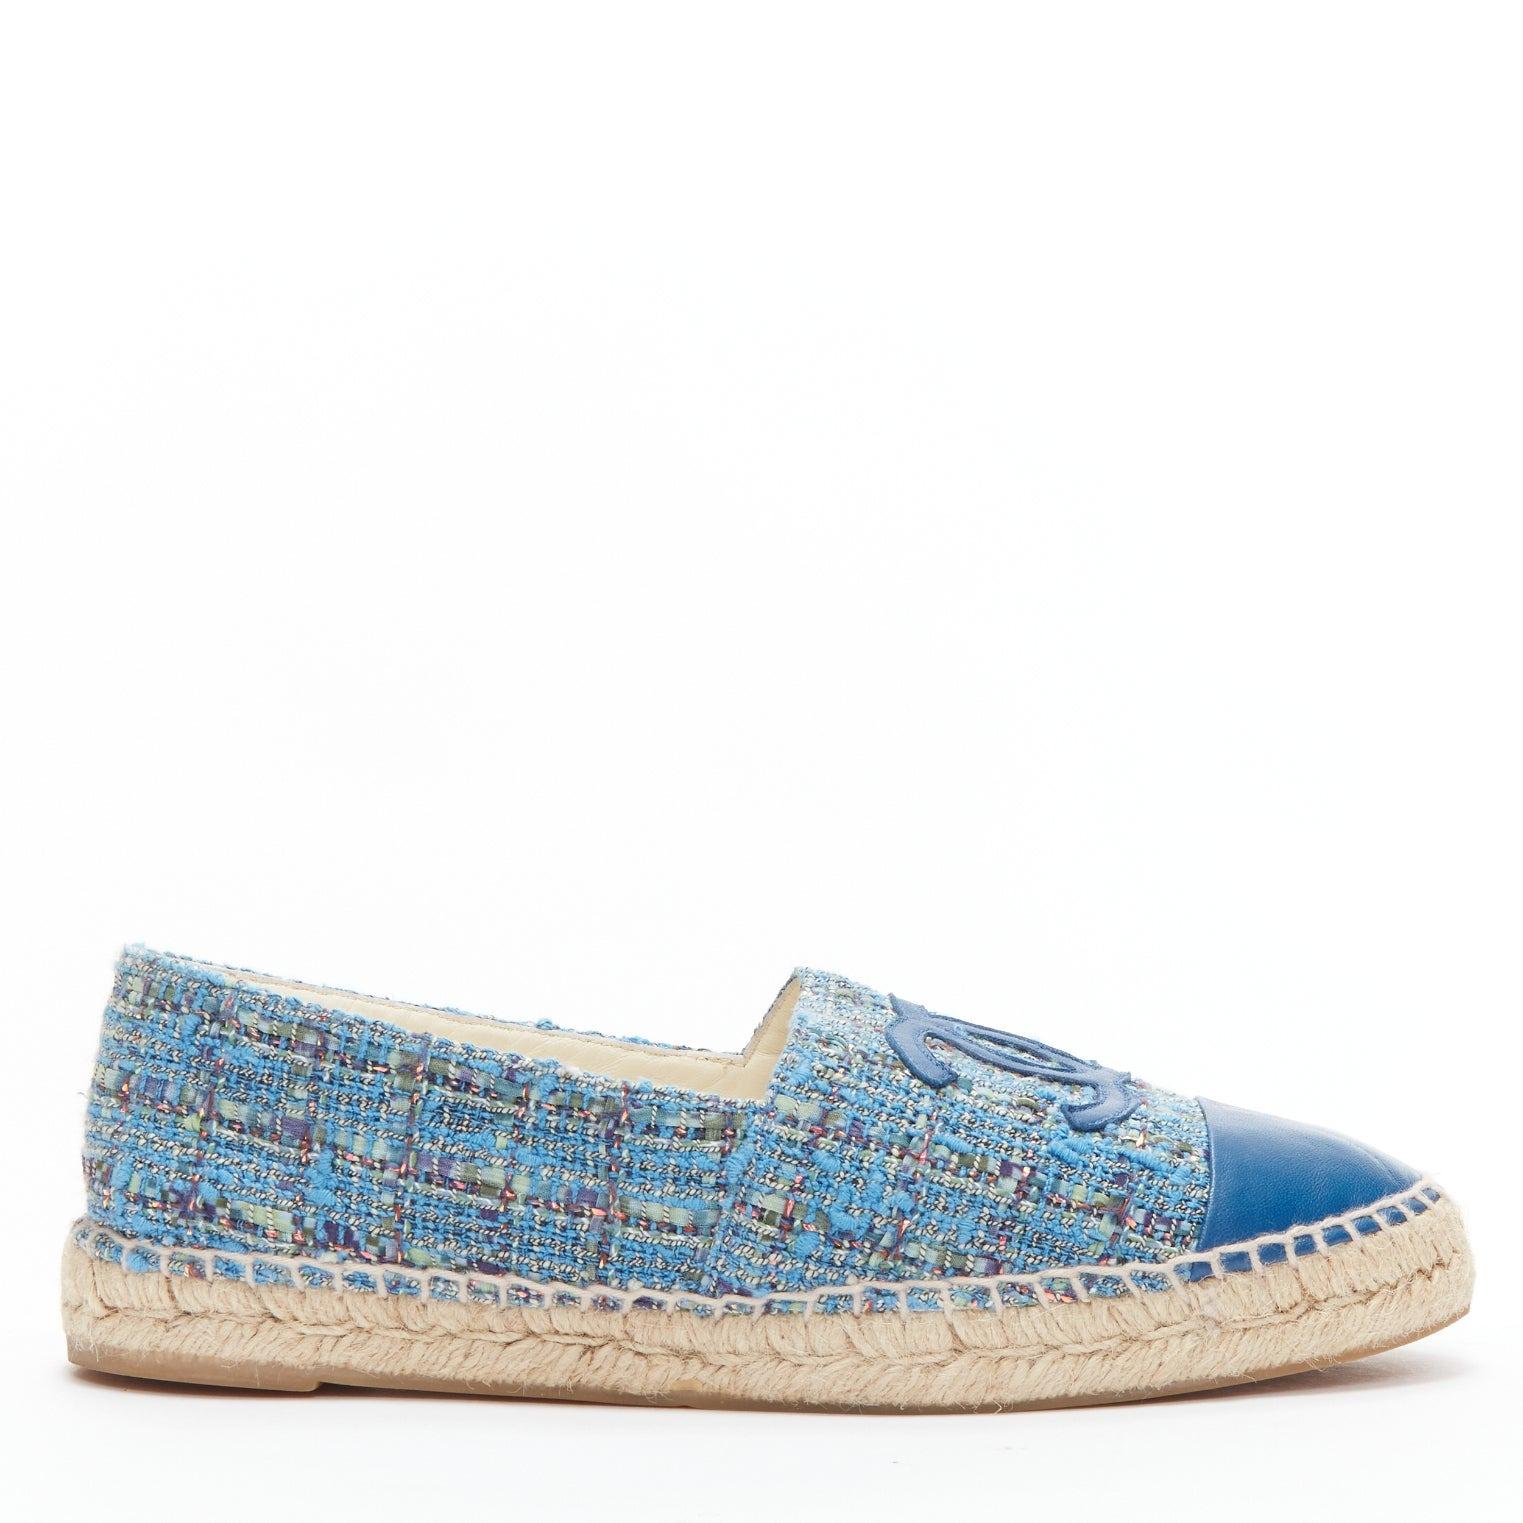 CHANEL blue tweed CC logo leather toe cap espadrille shoes EU40
Reference: JYLM/A00052
Brand: Chanel
Designer: Karl Lagerfeld
Material: Leather, Tweed
Color: Blue, Multicolour
Pattern: Tweed
Closure: Slip On
Made in: Spain

CONDITION:
Condition: